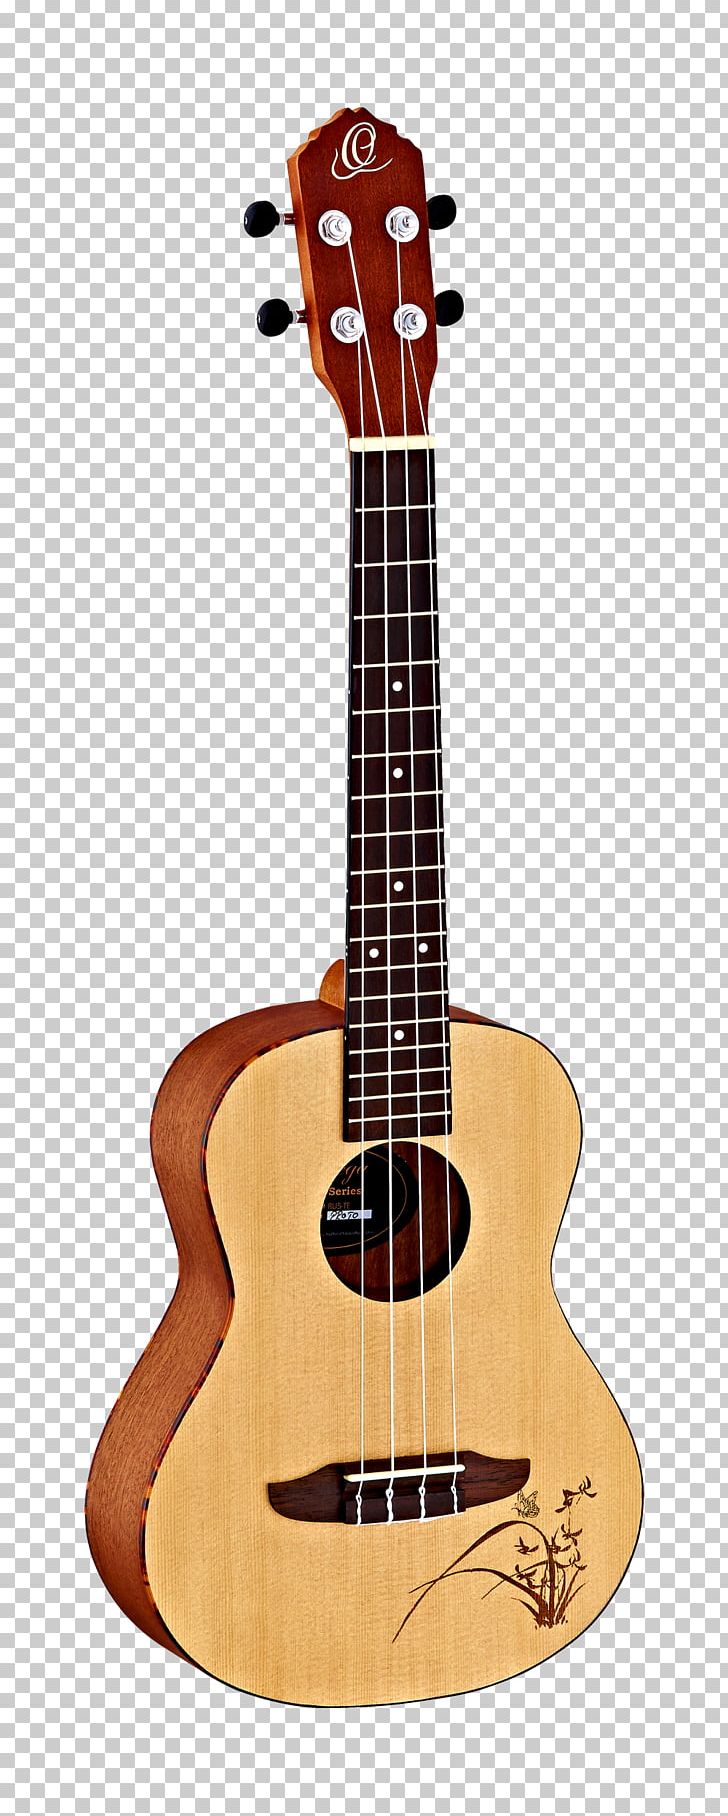 Ukulele Steel-string Acoustic Guitar Acoustic-electric Guitar Tenor PNG, Clipart, Amancio Ortega, Cuatro, Guitar Accessory, Musical Instrument, Musical Instruments Free PNG Download